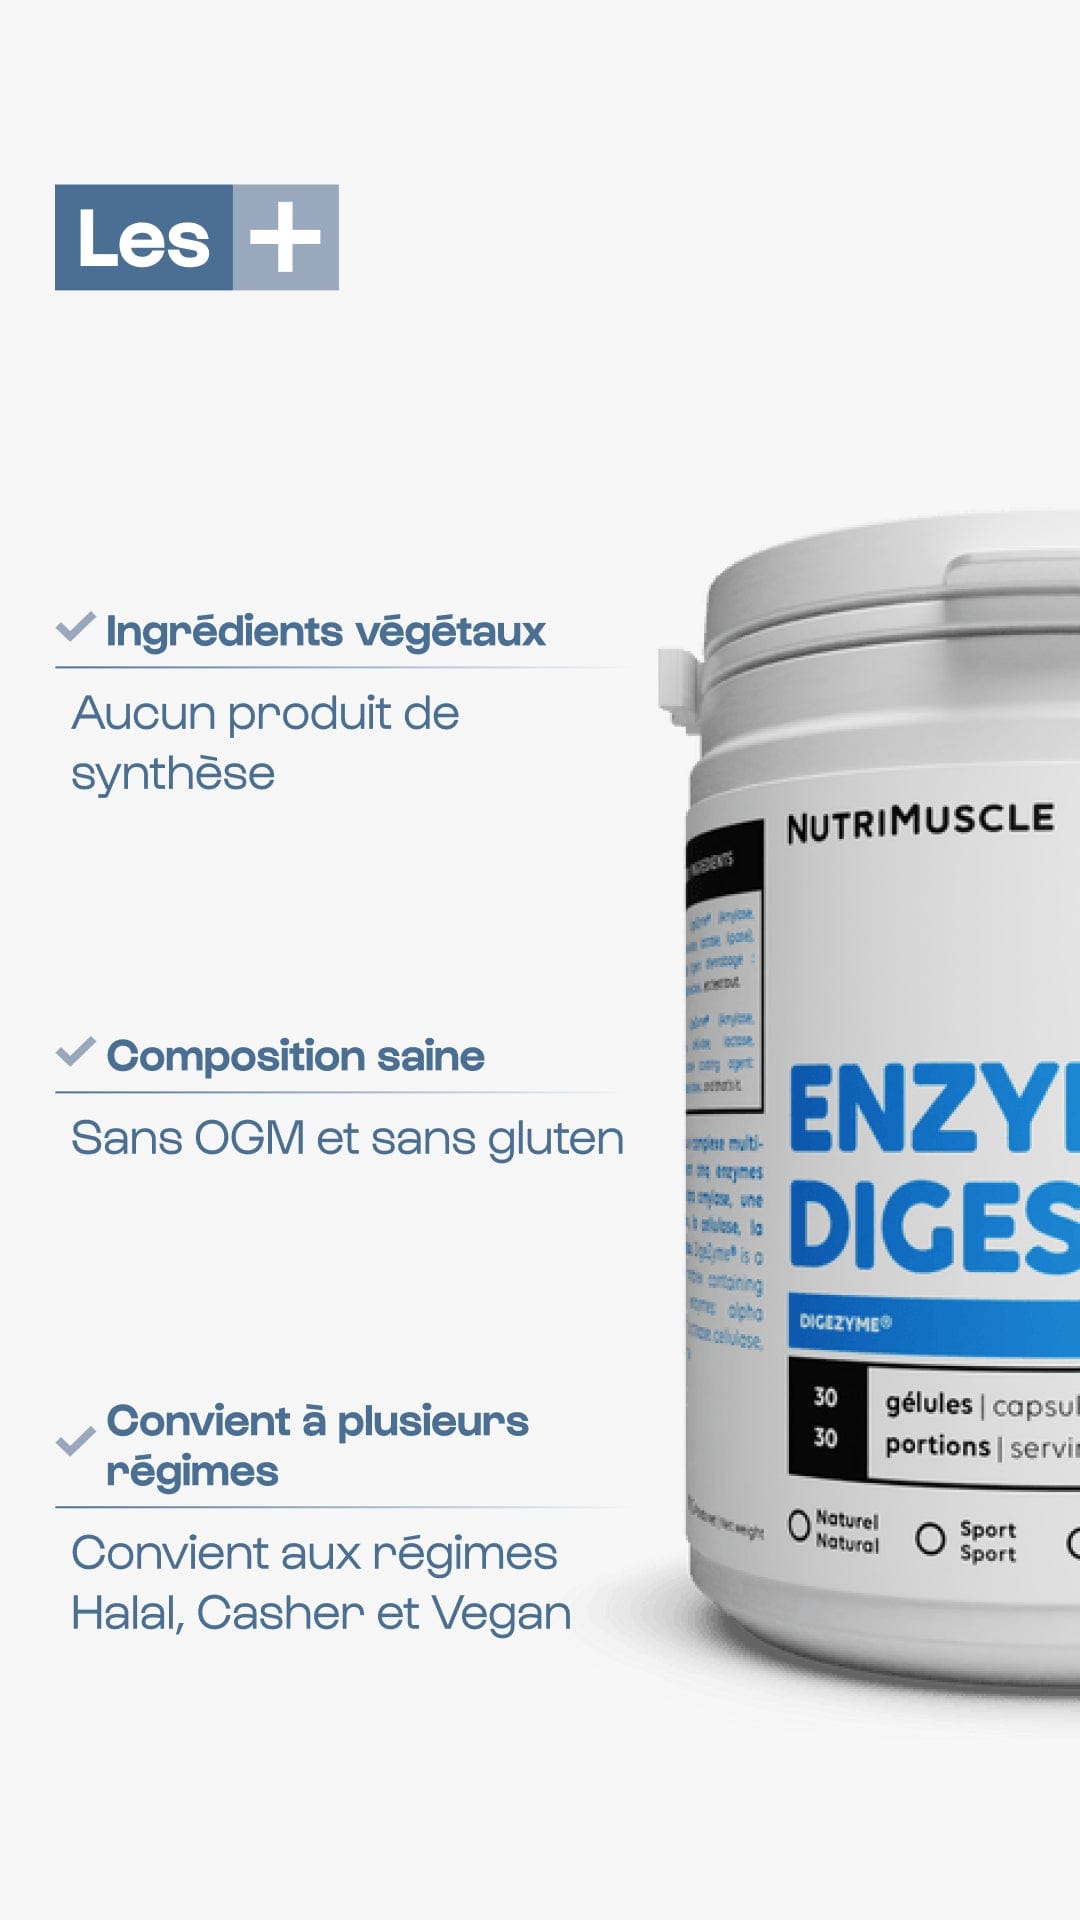 Nutrimuscle Nutriments Enzymes digestives (Digezyme®)